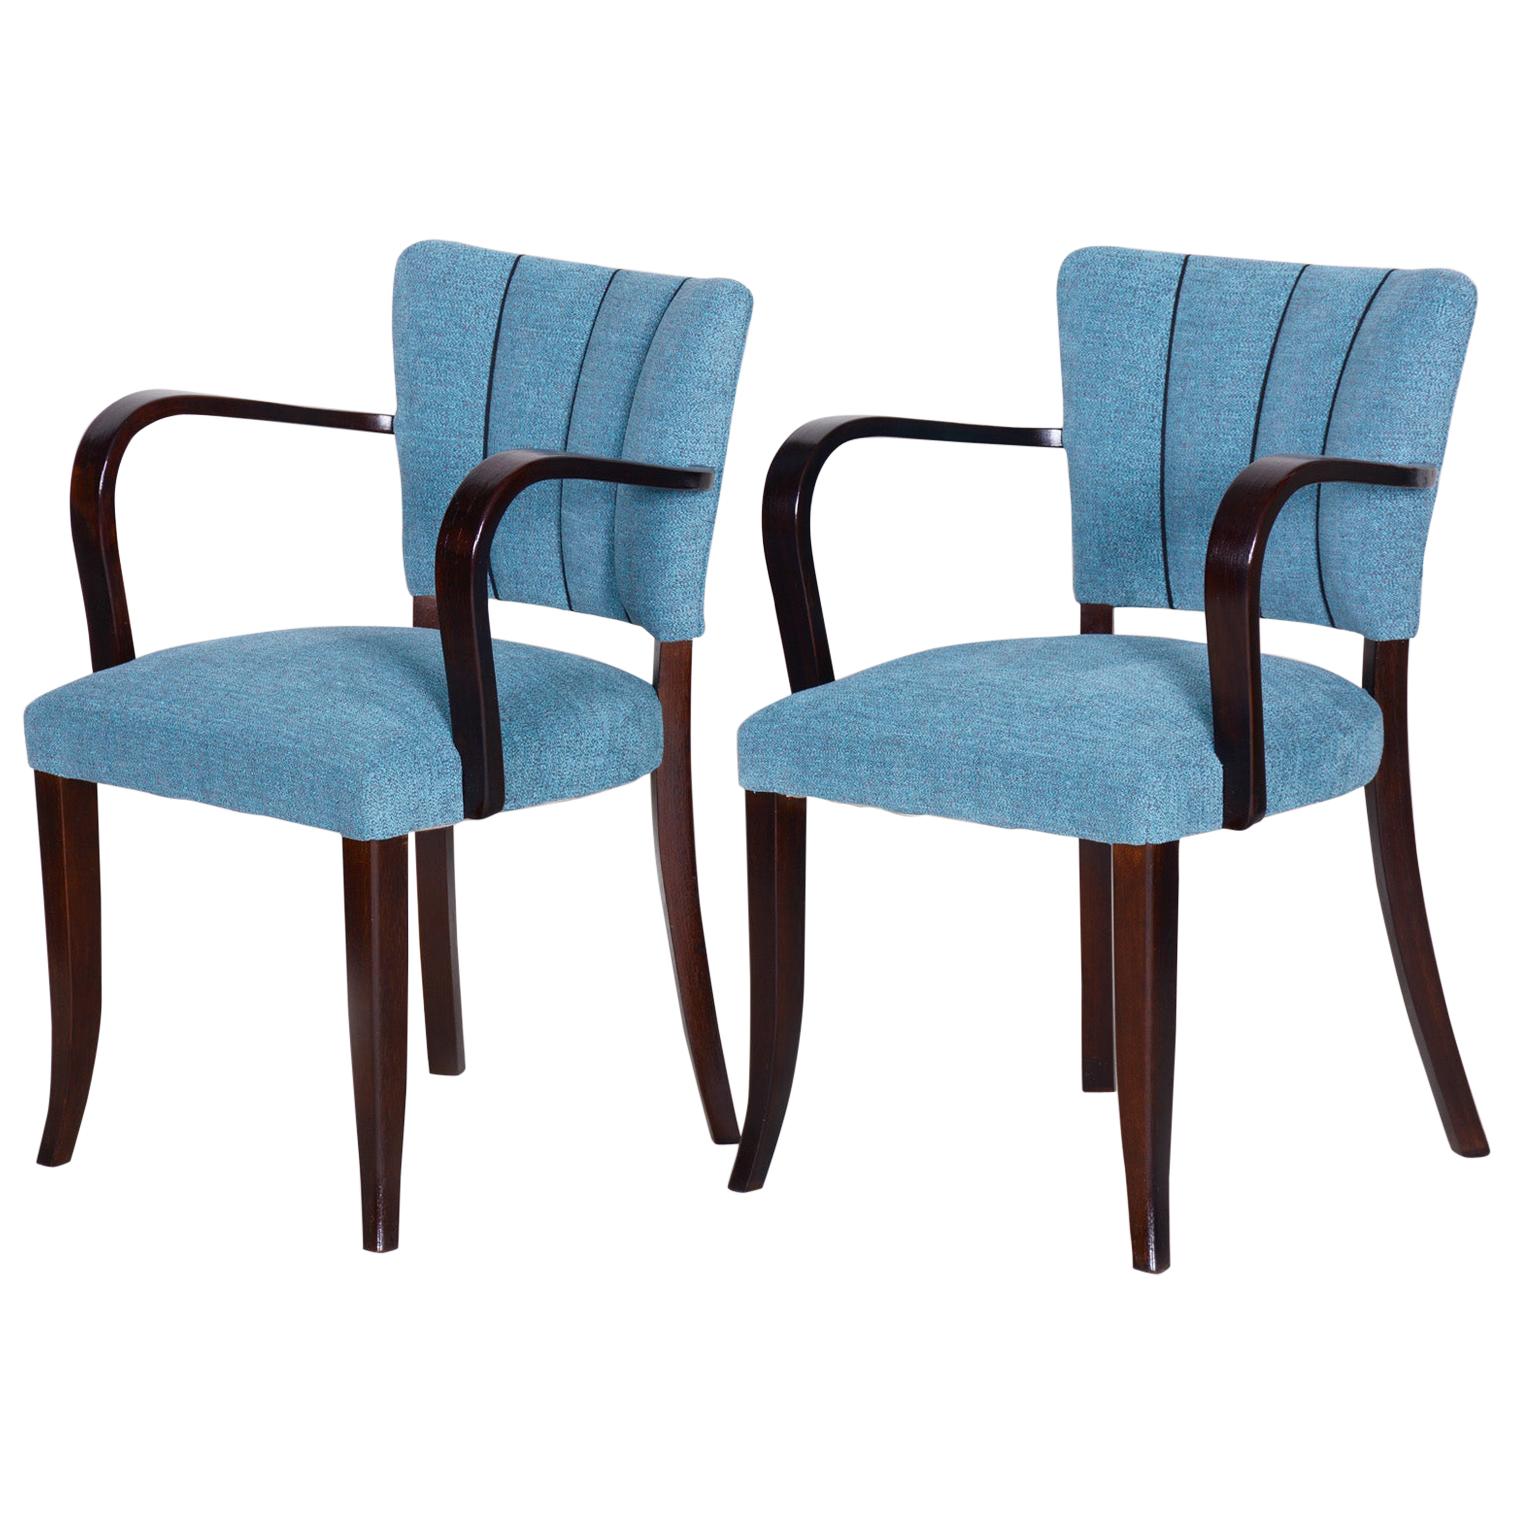 Pair of Restored Art Deco Blue Oak Armchairs, 1930s, France, New Upholstery